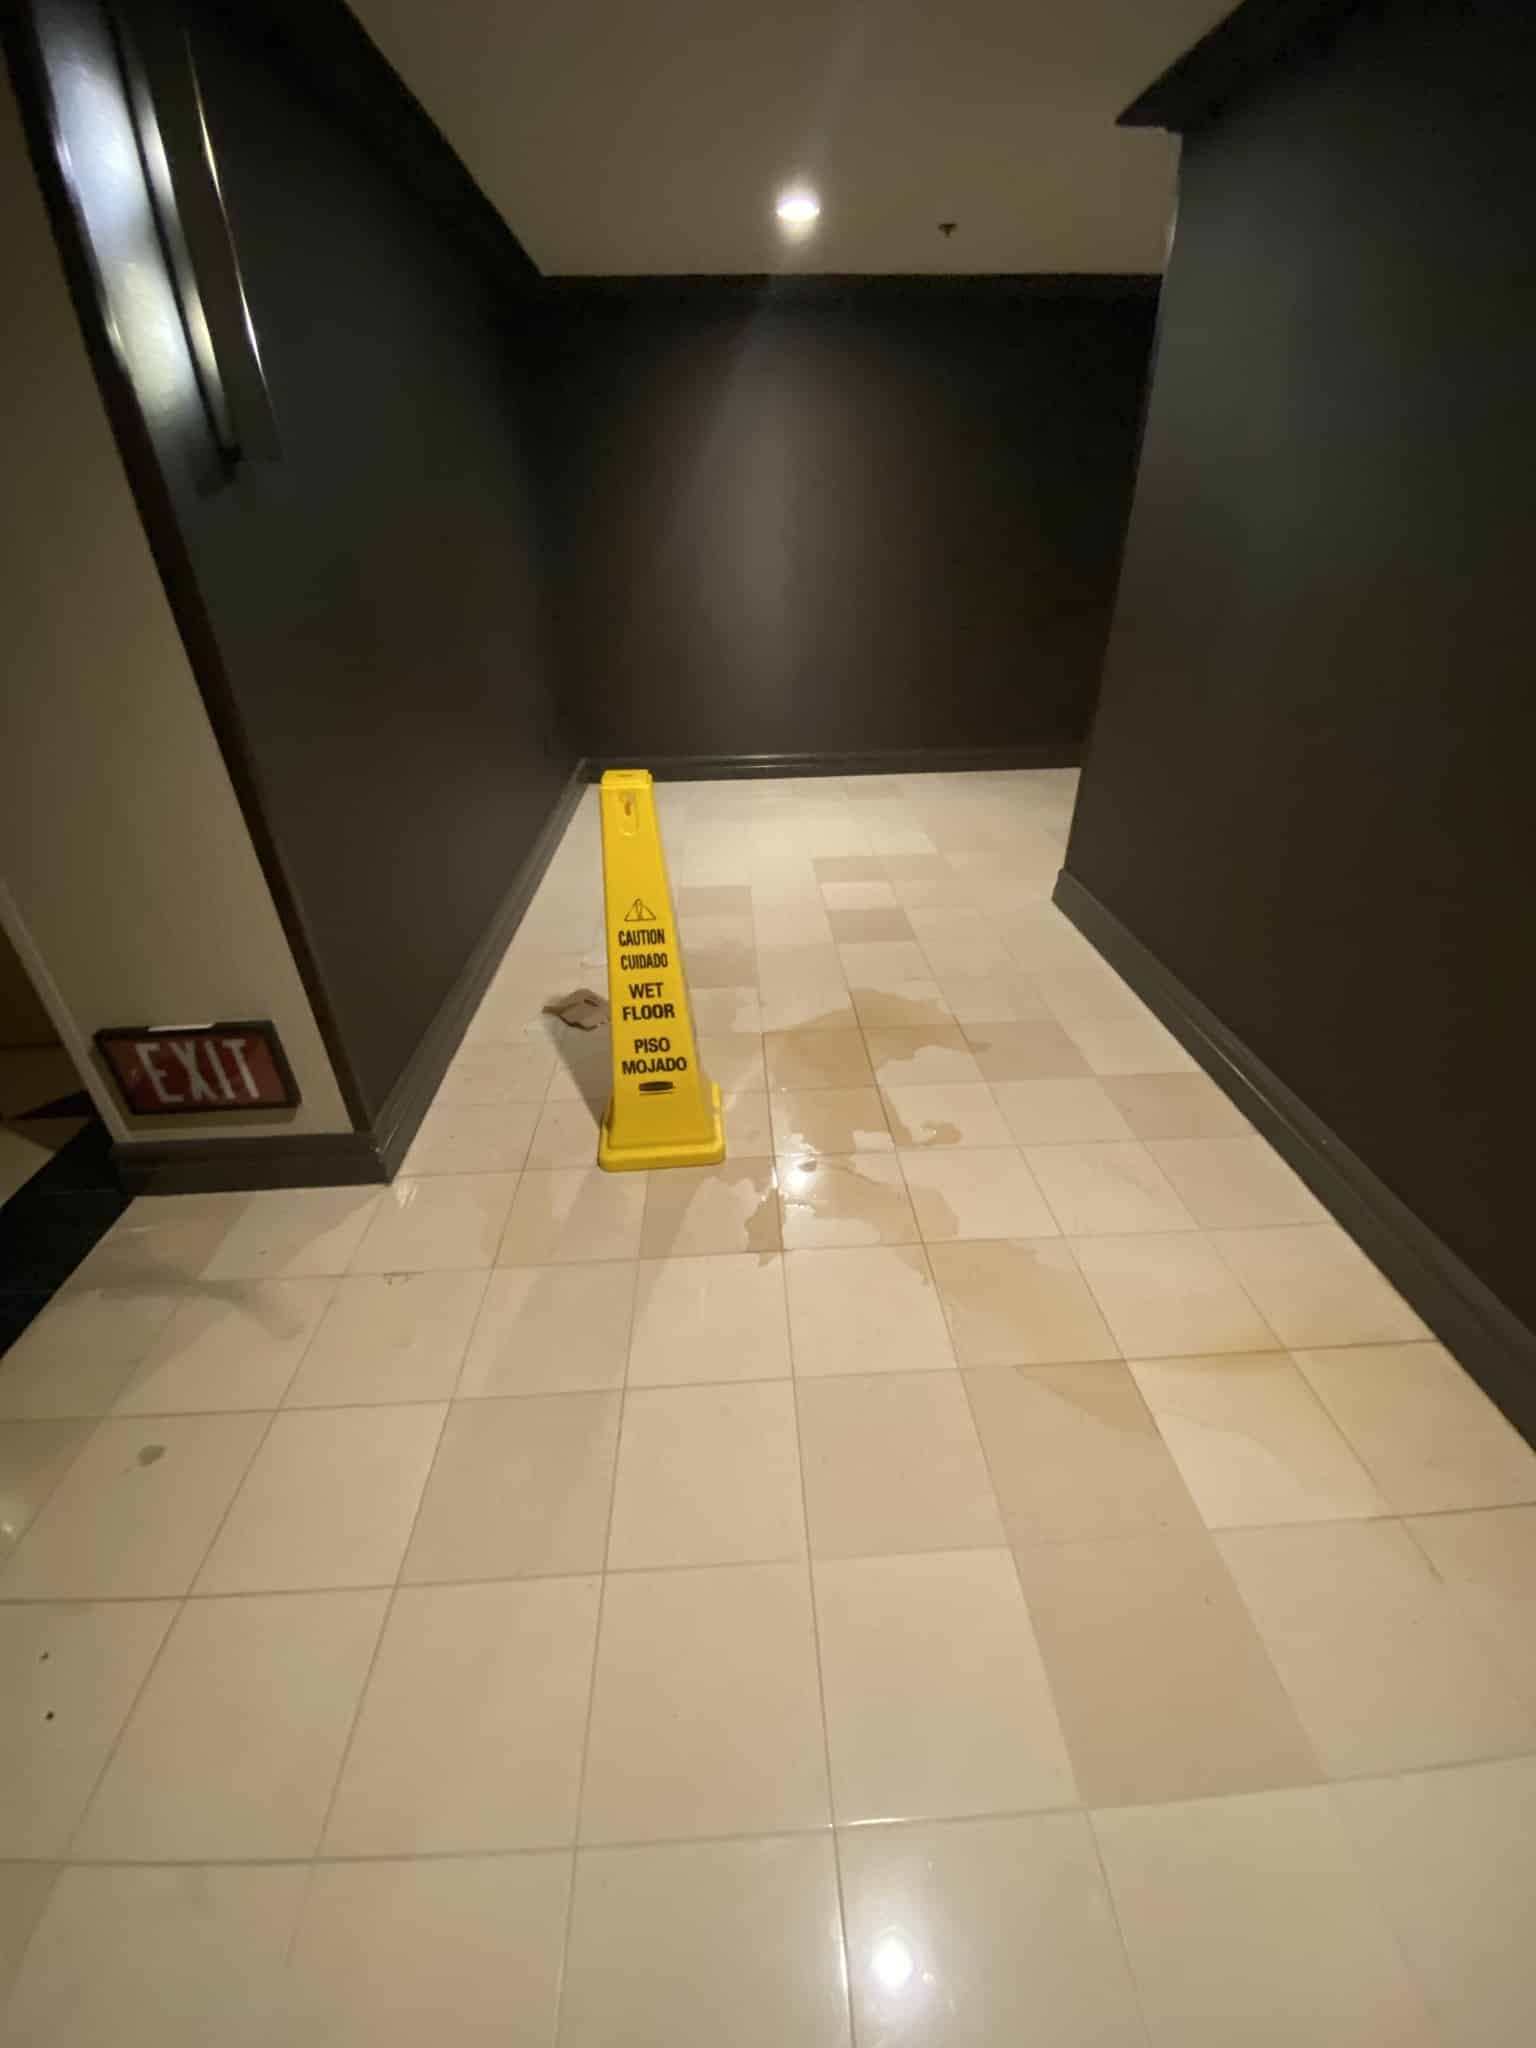 Spill on floor that needs an anti-slip coating for your protection